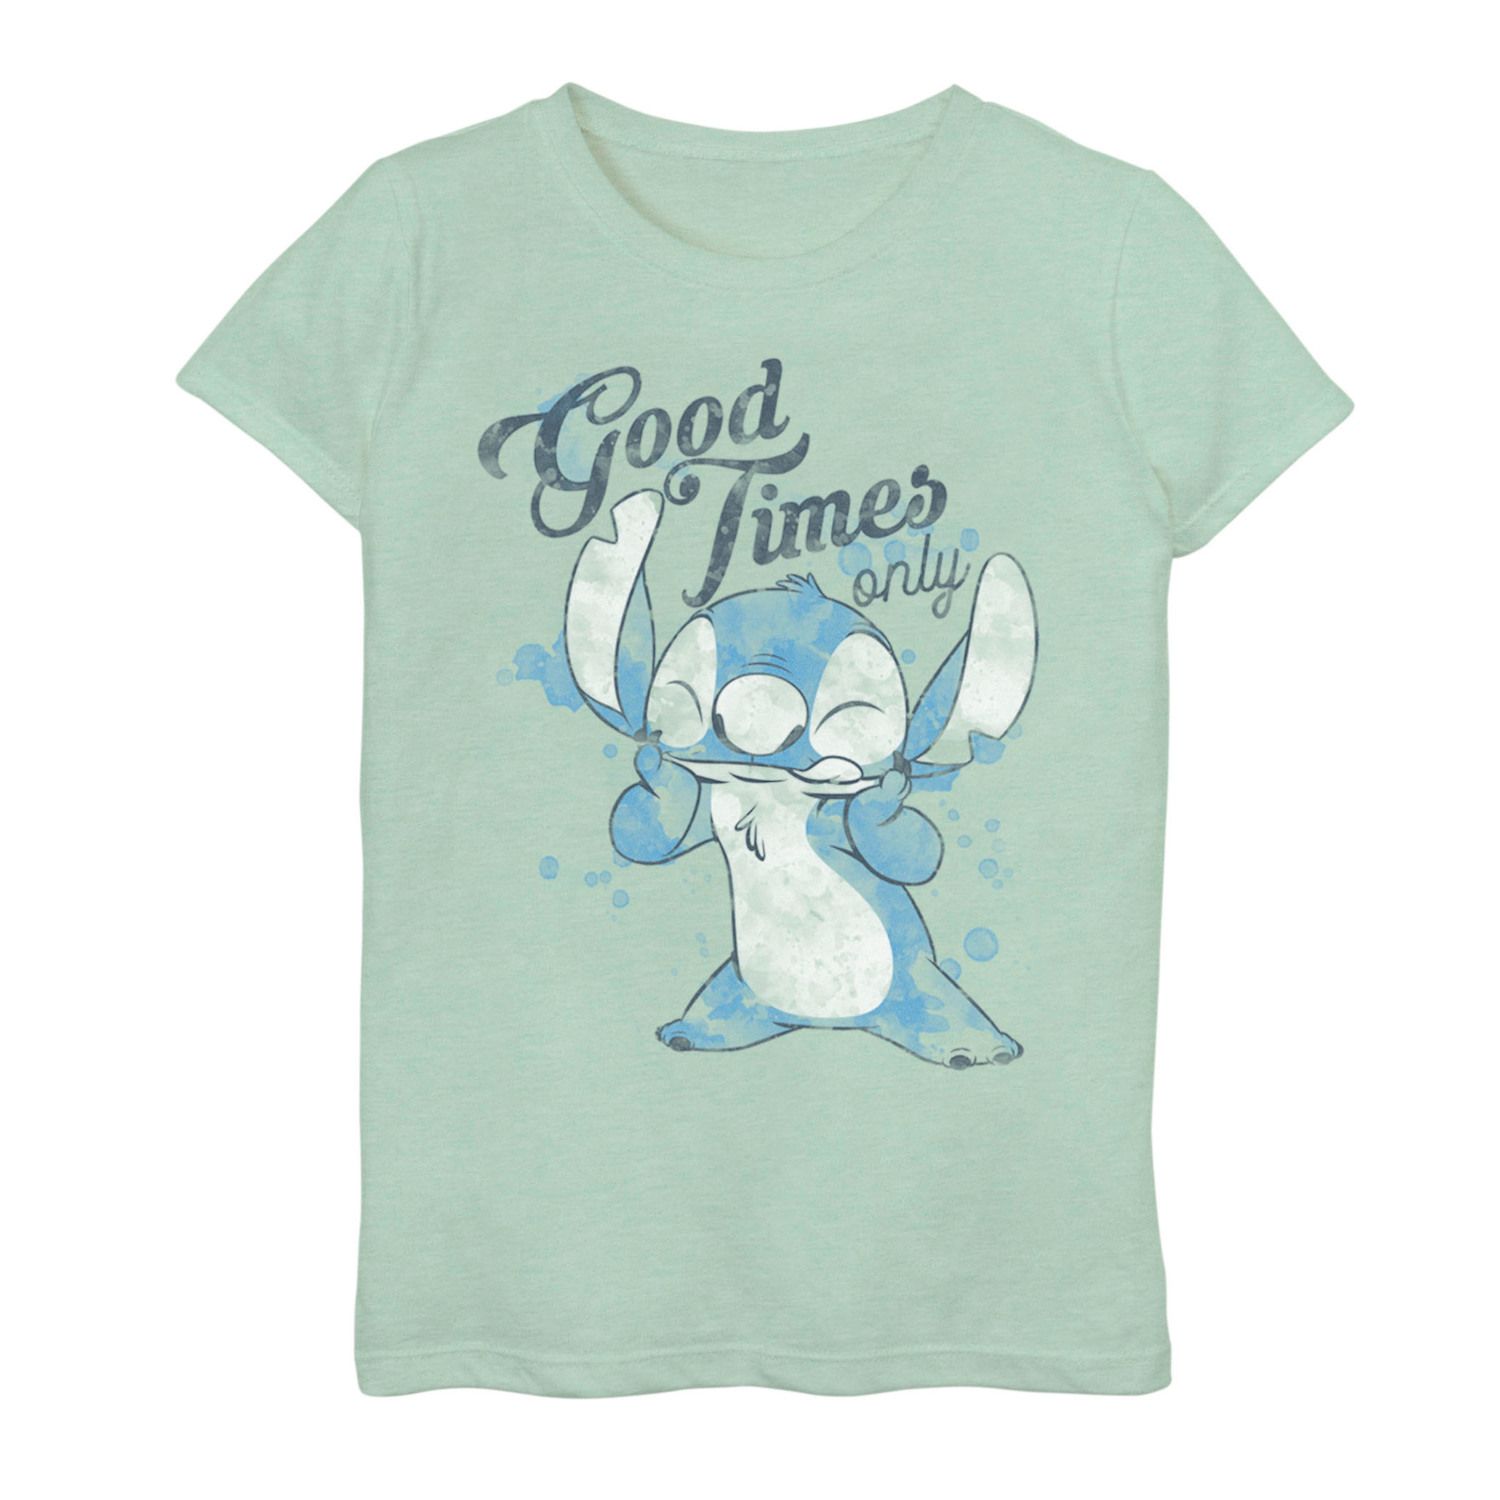 Image for Disney s Lilo & Stitch Girls 7-16 Good Times Only Splatter Portrait Graphic Tee at Kohl's.